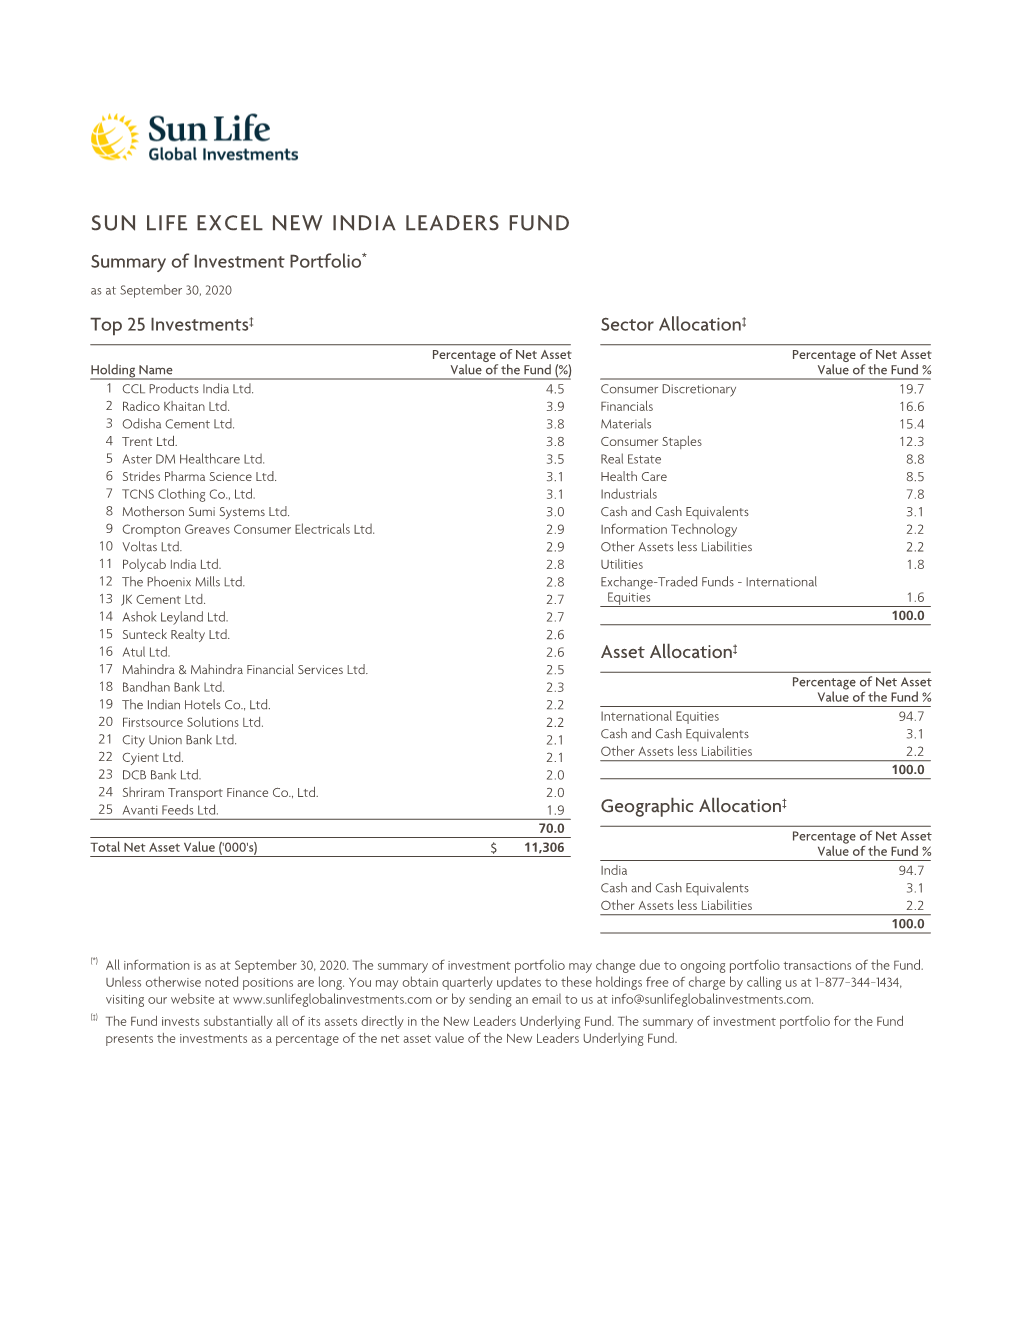 Sun Life Excel New India Leaders Fund